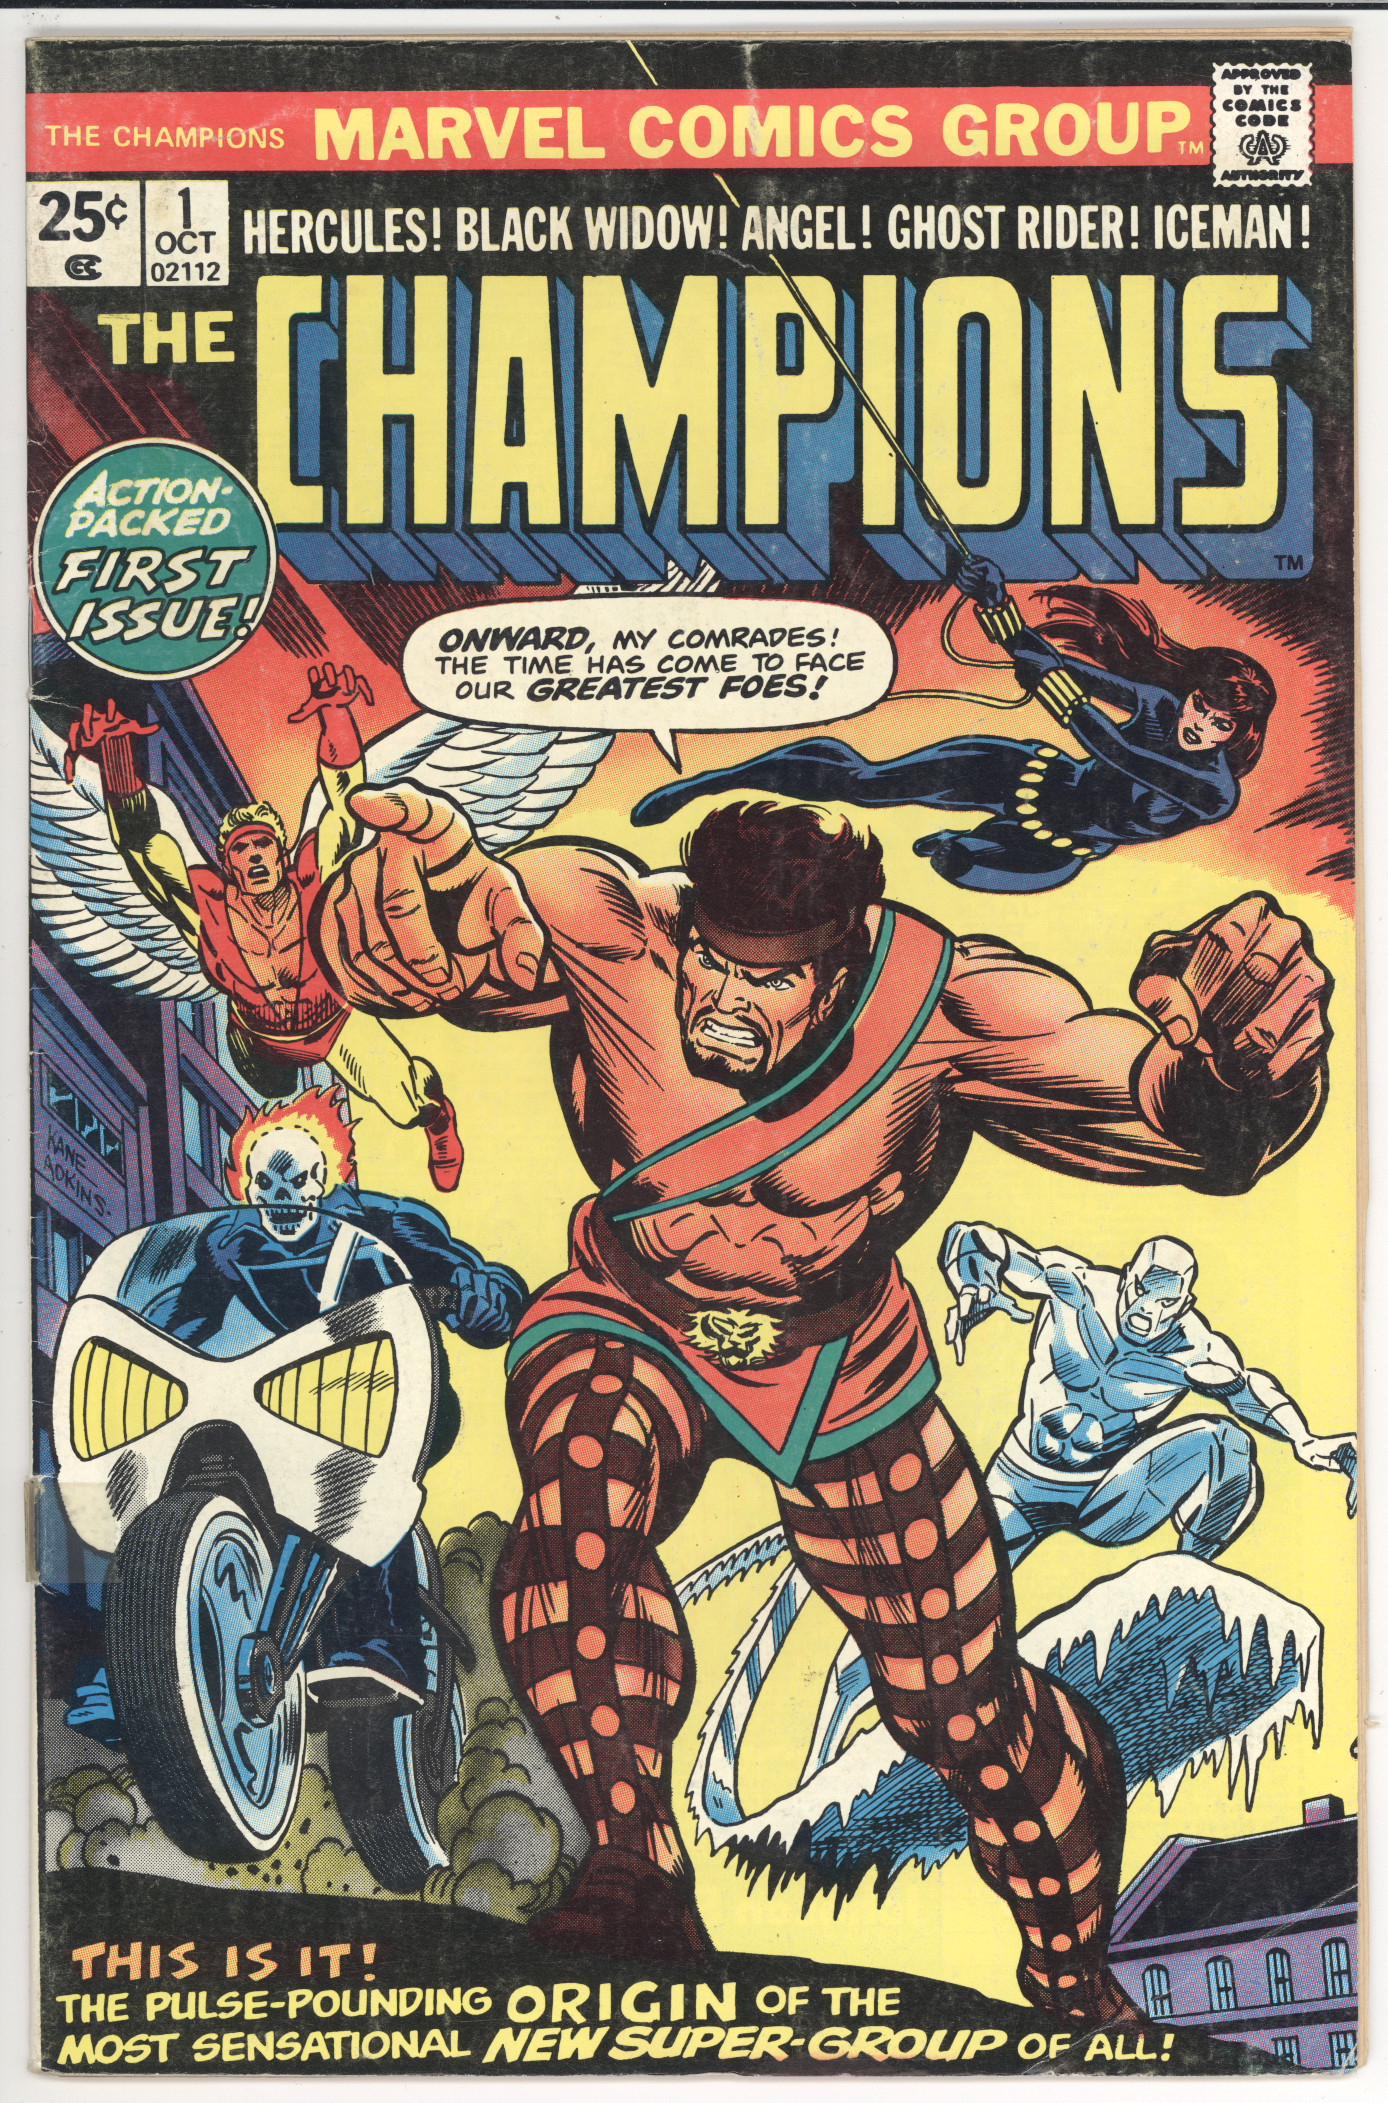 The Champions #1 front